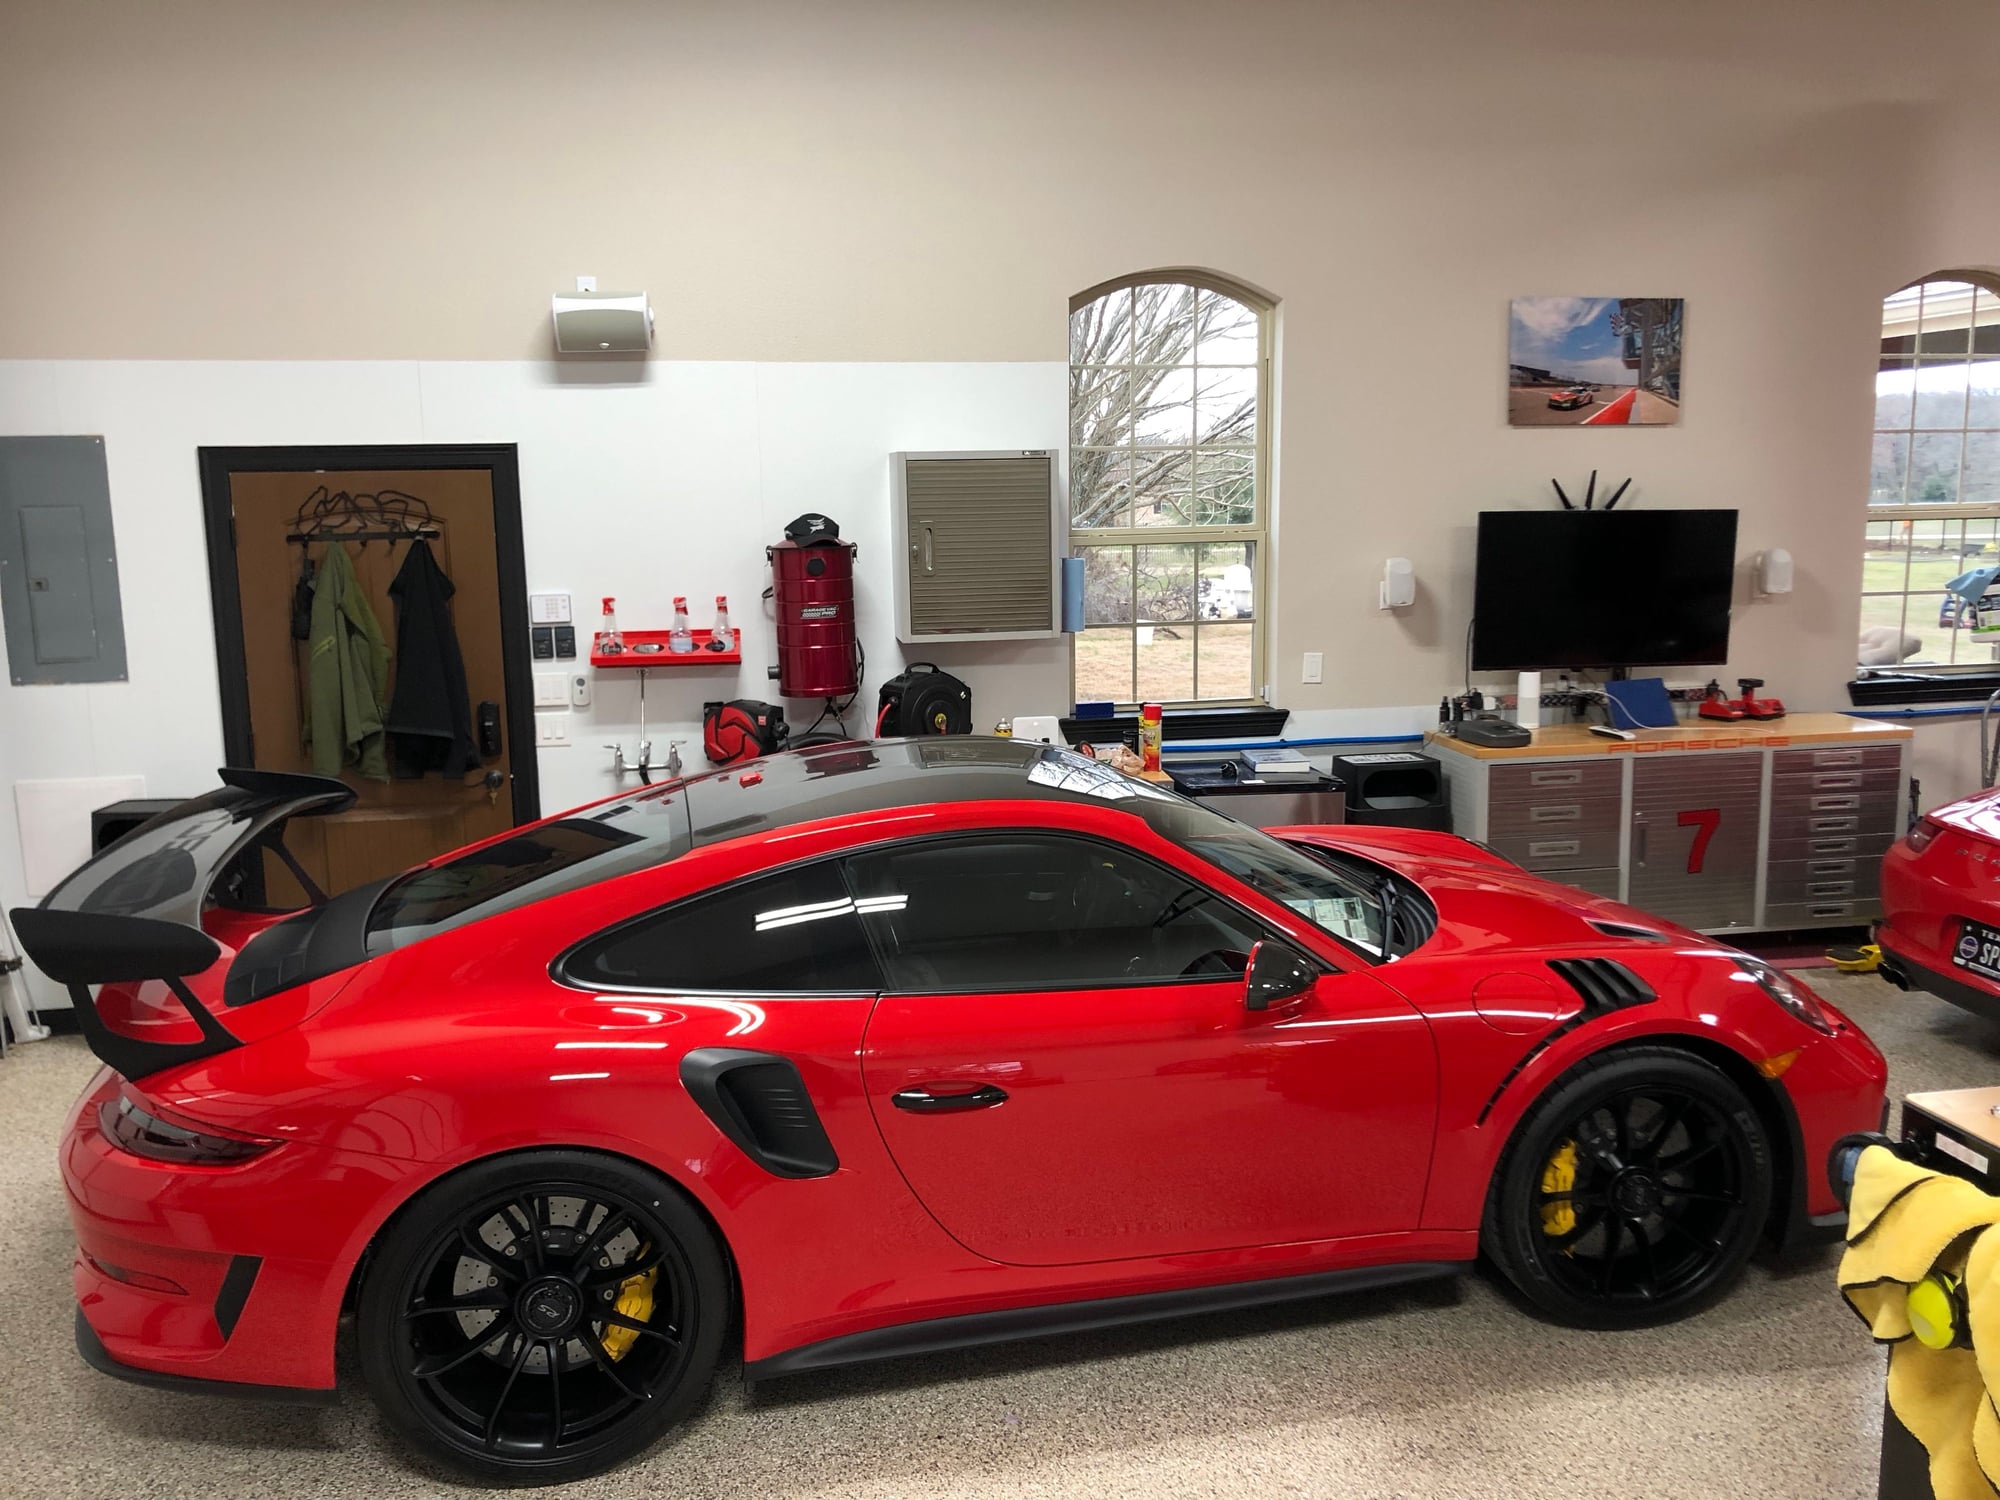 2019 Porsche GT3 - 2019 Porsche GT3 RS Weissach - Used - VIN WPOAF2A90KS165503 - 36 Miles - 6 cyl - 2WD - Automatic - Coupe - Red - Argyle, TX 76226, United States